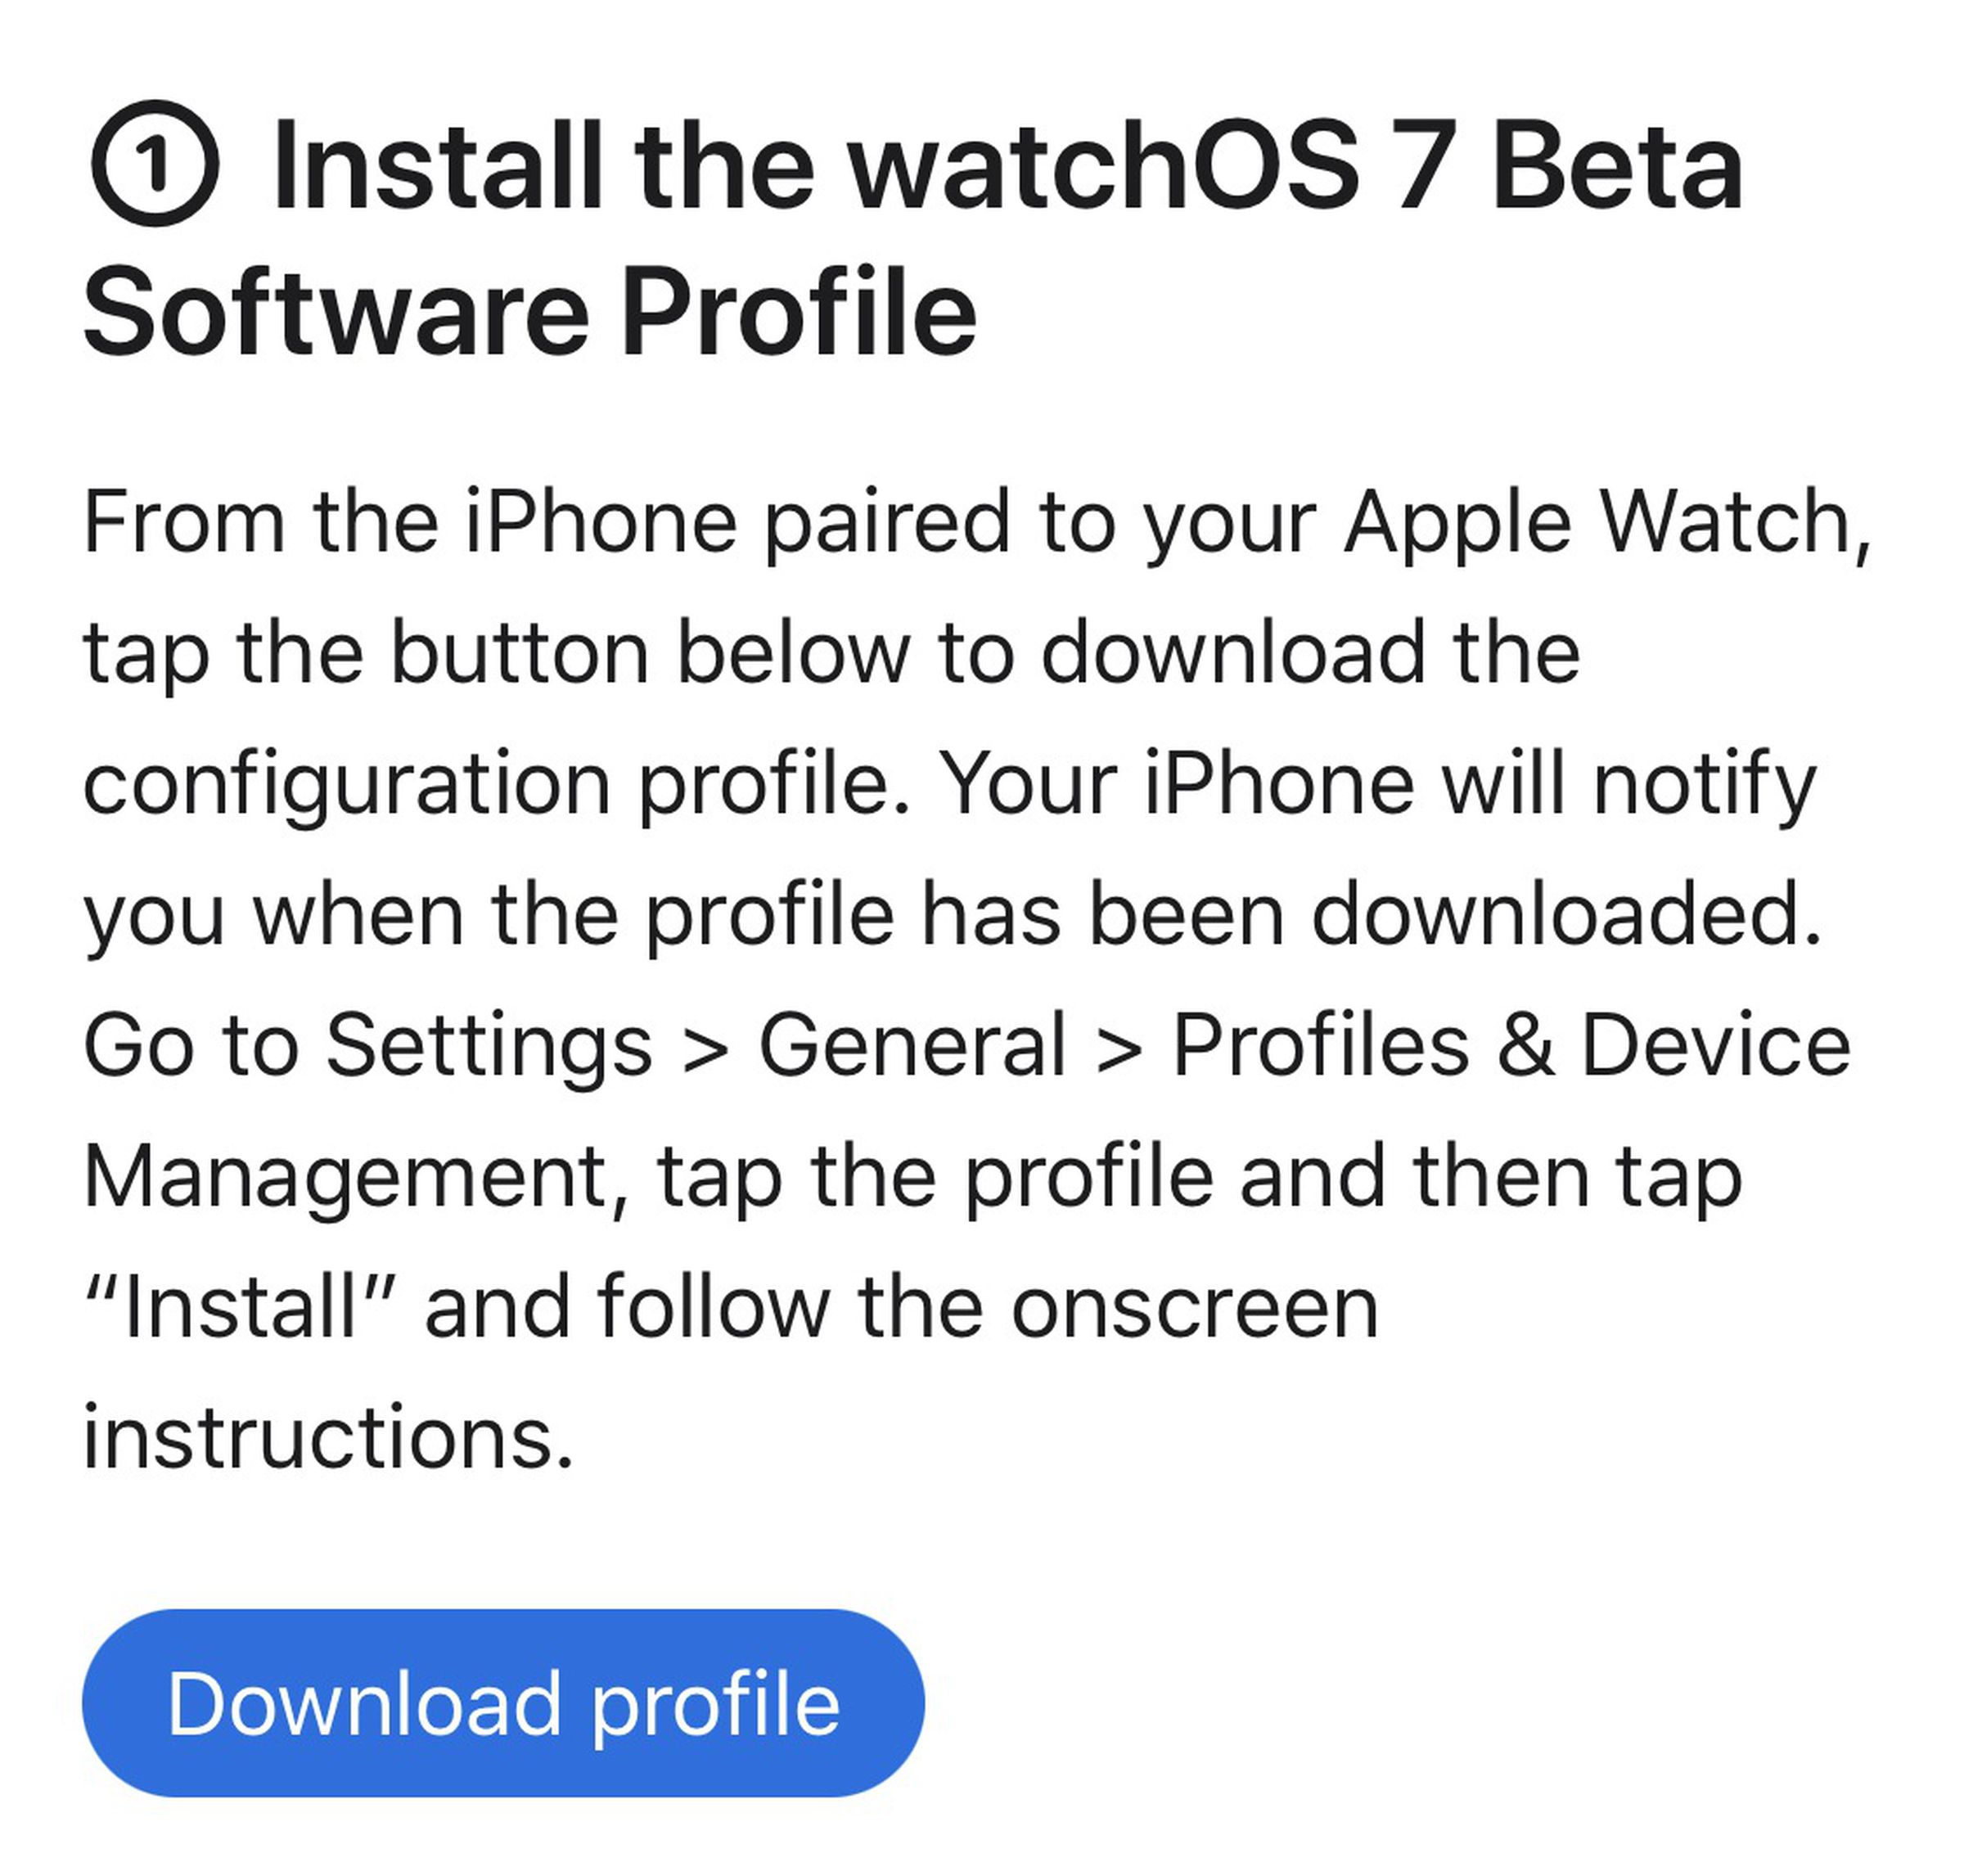 <em>Go to the watchOS section and download the profile for the watch.</em>